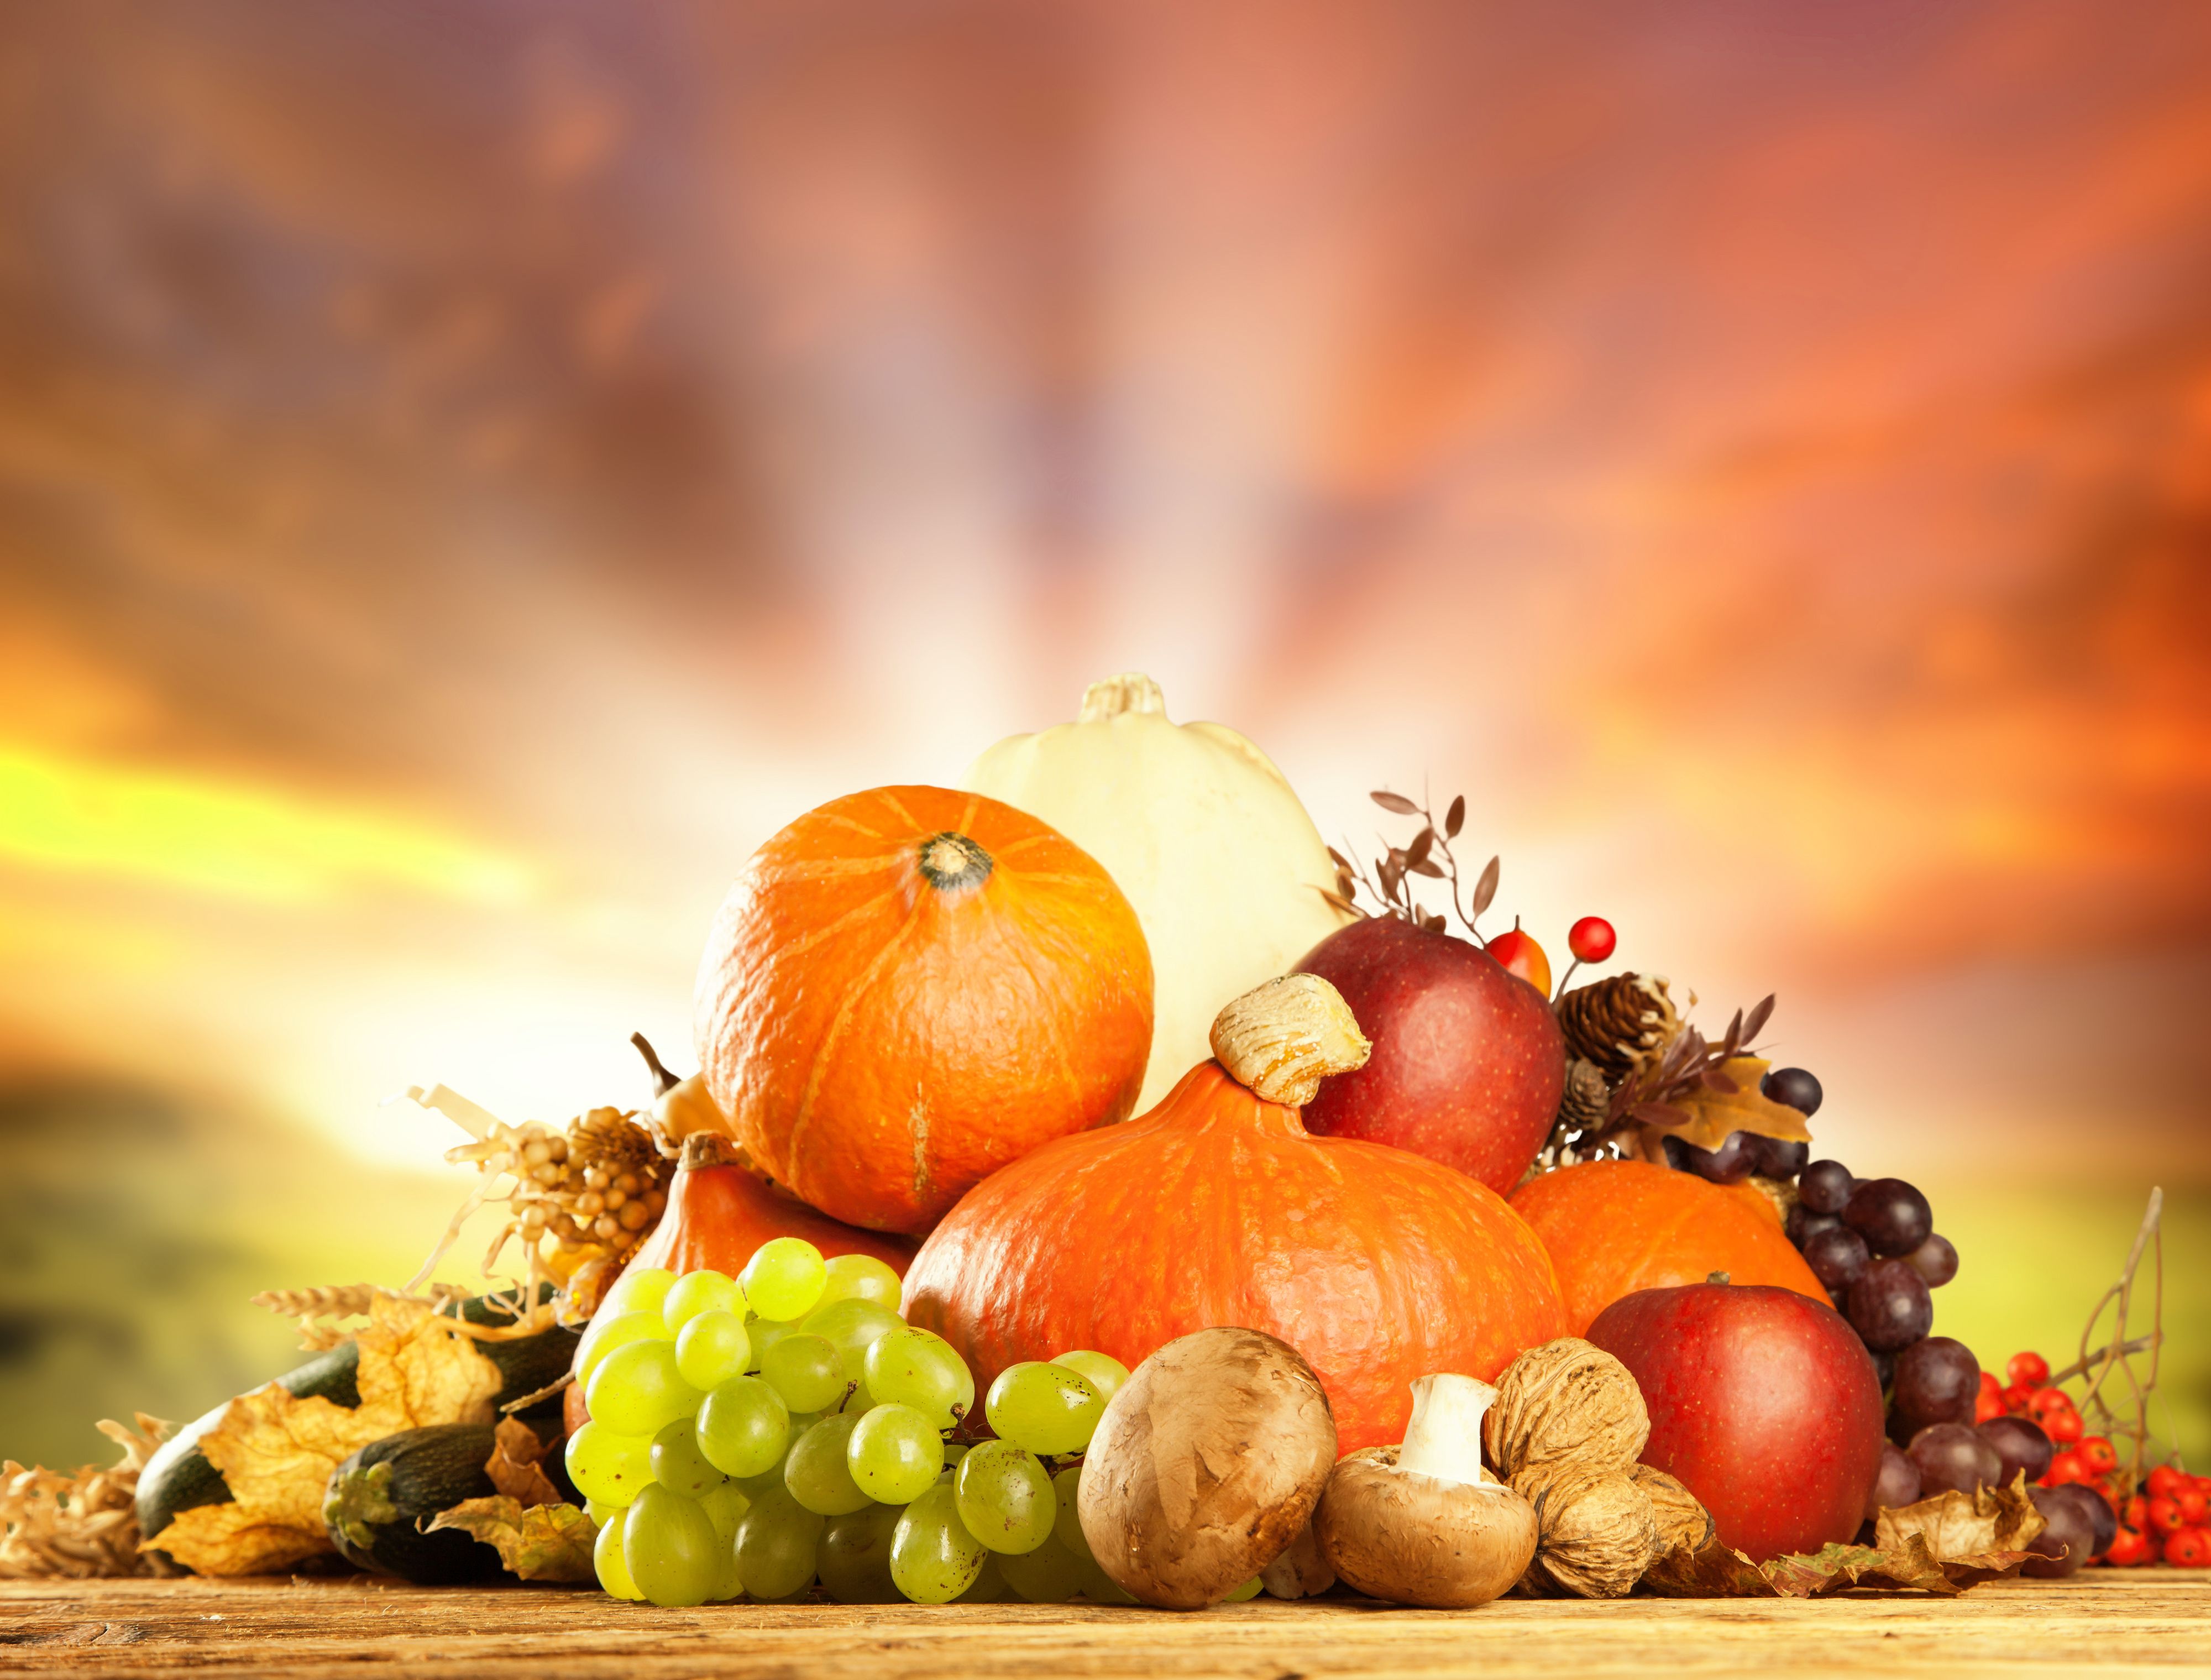 Autumn Fruits Background Quality Image And Transparent PNG Free Clipart